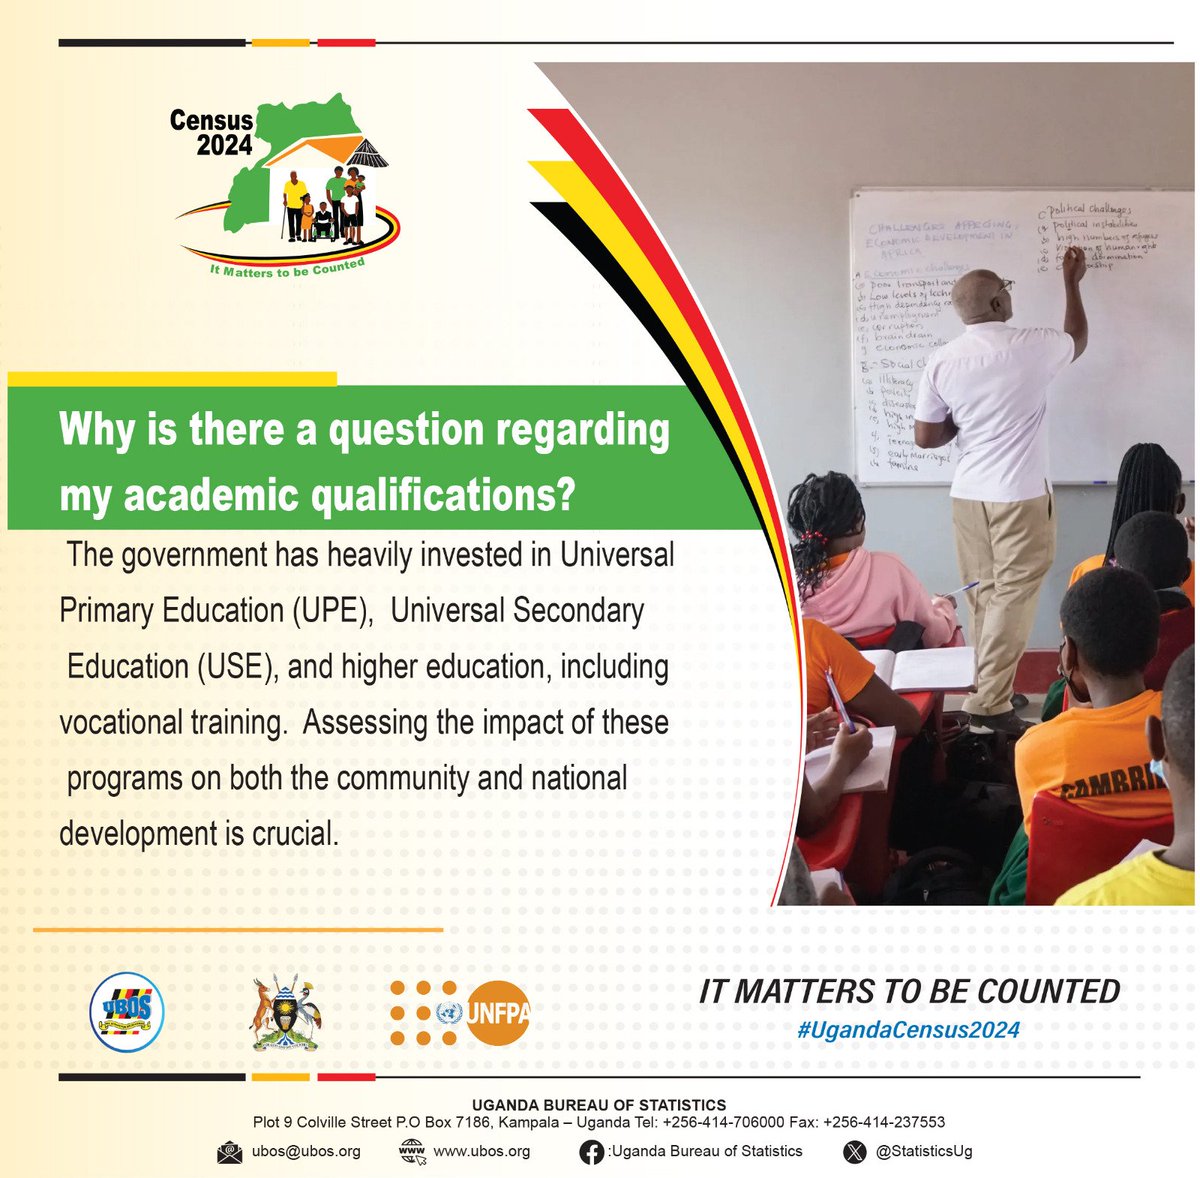 The #UgandaCensus2024 has been extended for one more week till 25th May Please give out your academic qualifications because the government is assessing the impact of its programs like UPE and USE @UNFPAUganda @UBOS_ED @StatisticsUg @mofpedU @UgandaMediaCent @OPMUganda